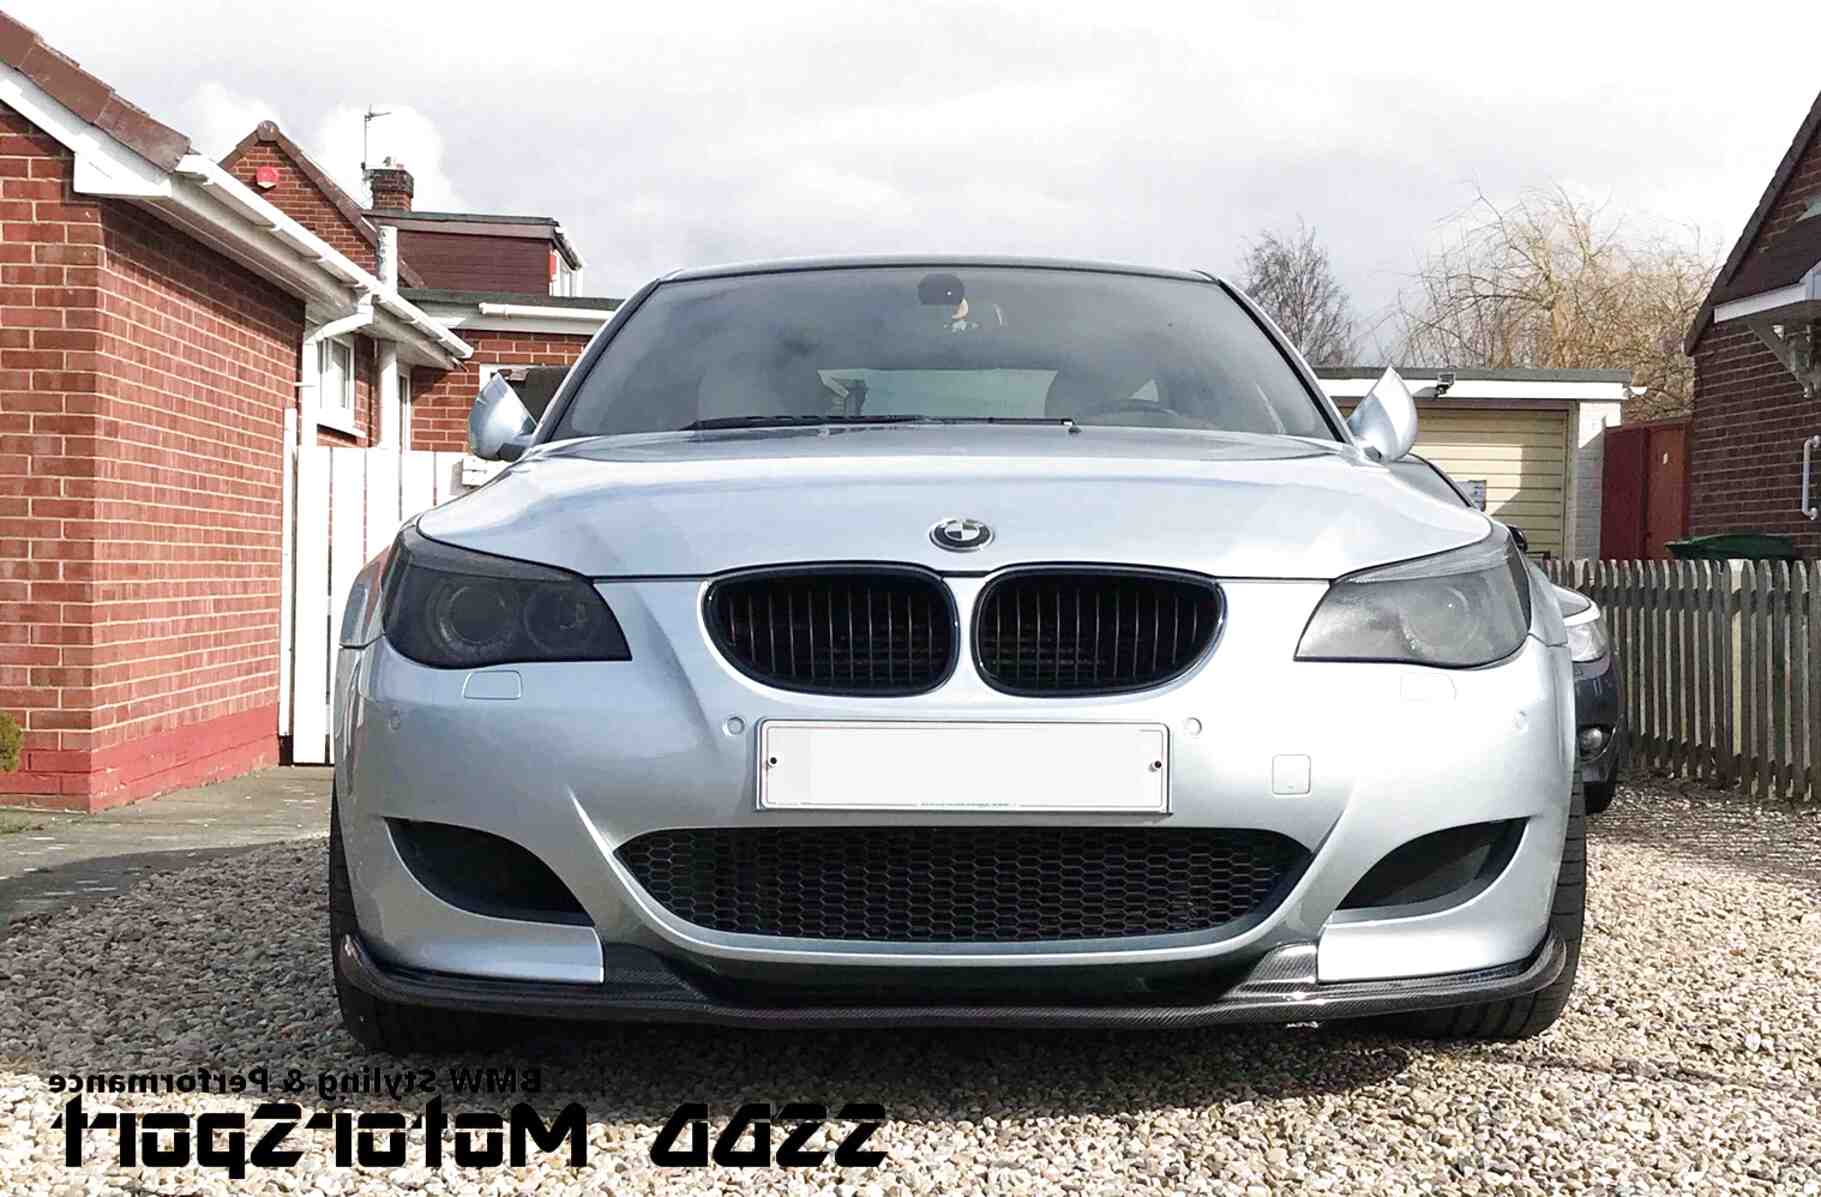 Bmw E60 Splitter for sale in UK View 57 bargains